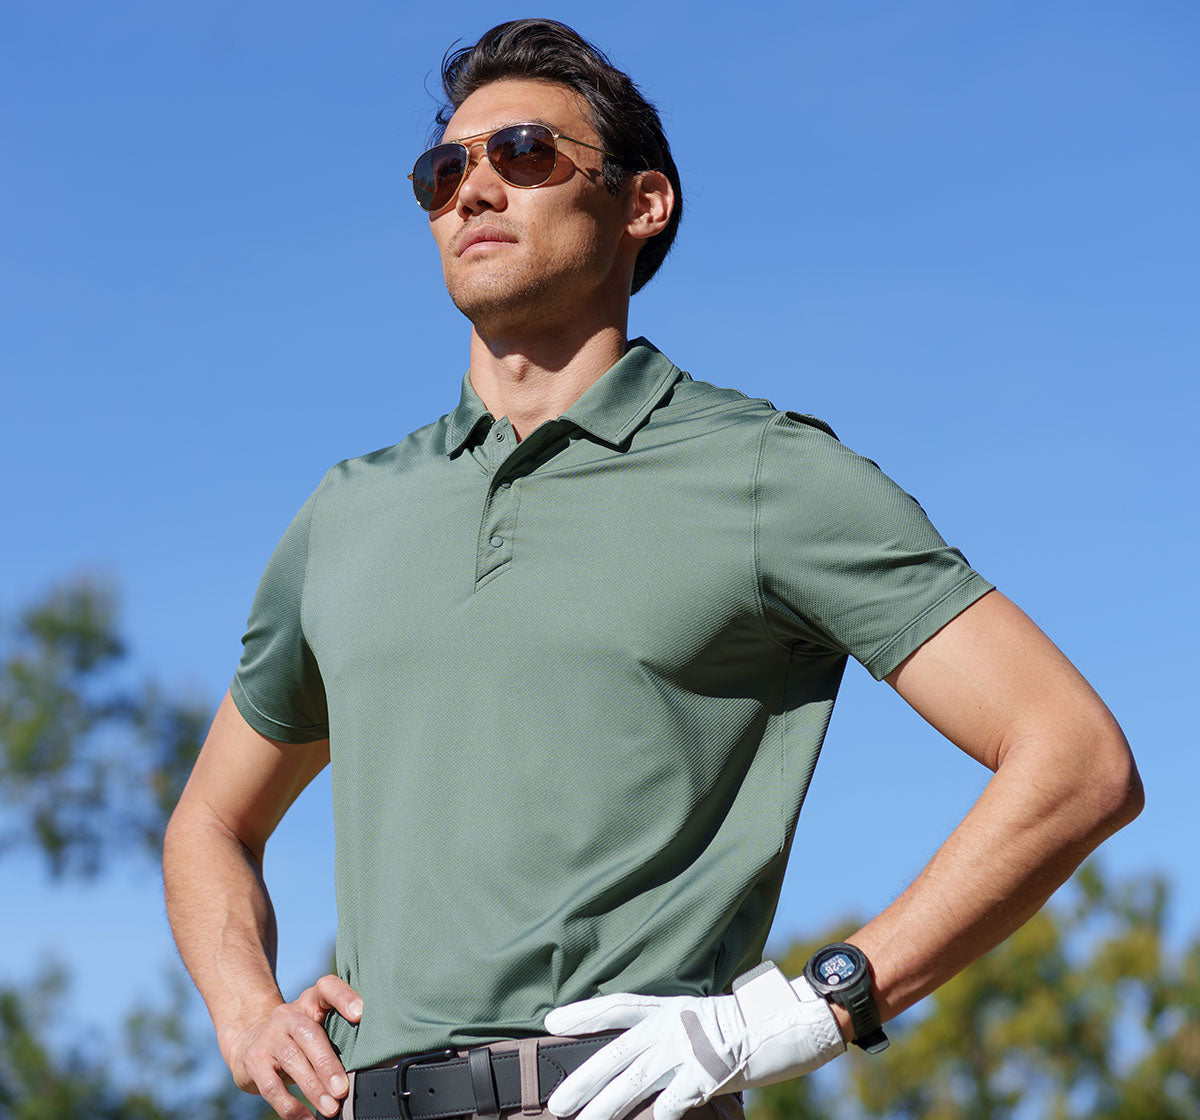 MPG male model on a golf course wearing a green golf shirt